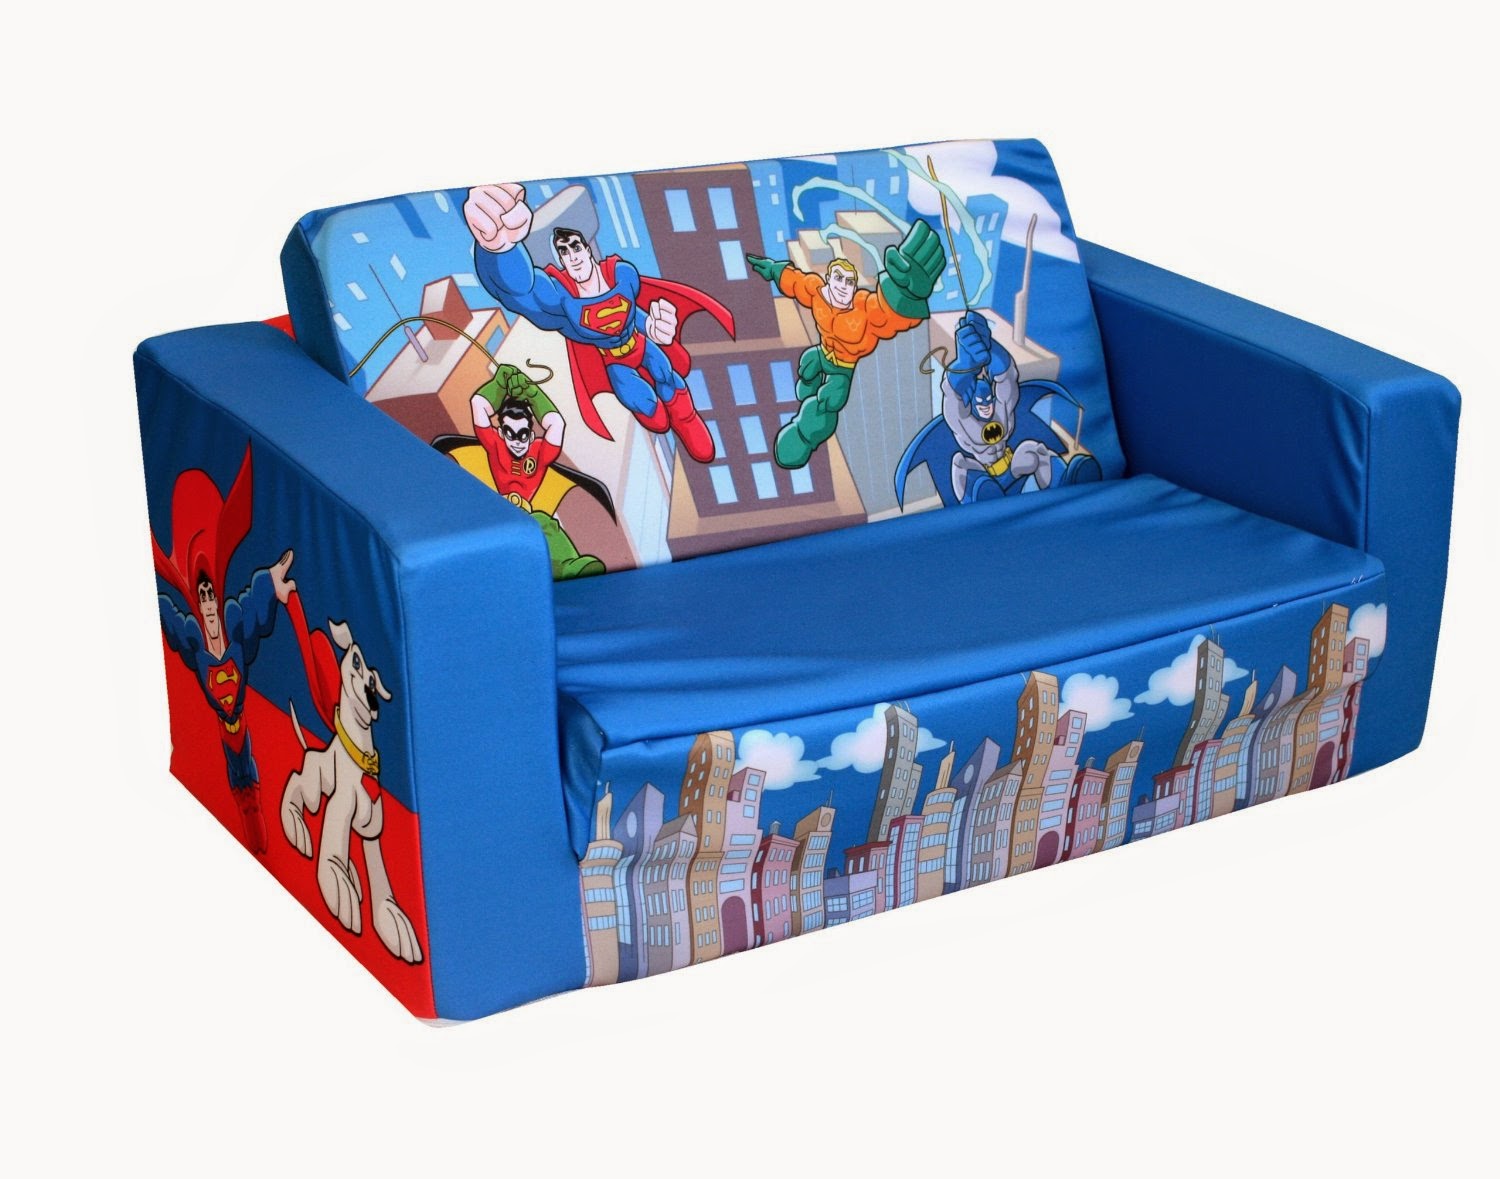 kids couch: mini couch for kids